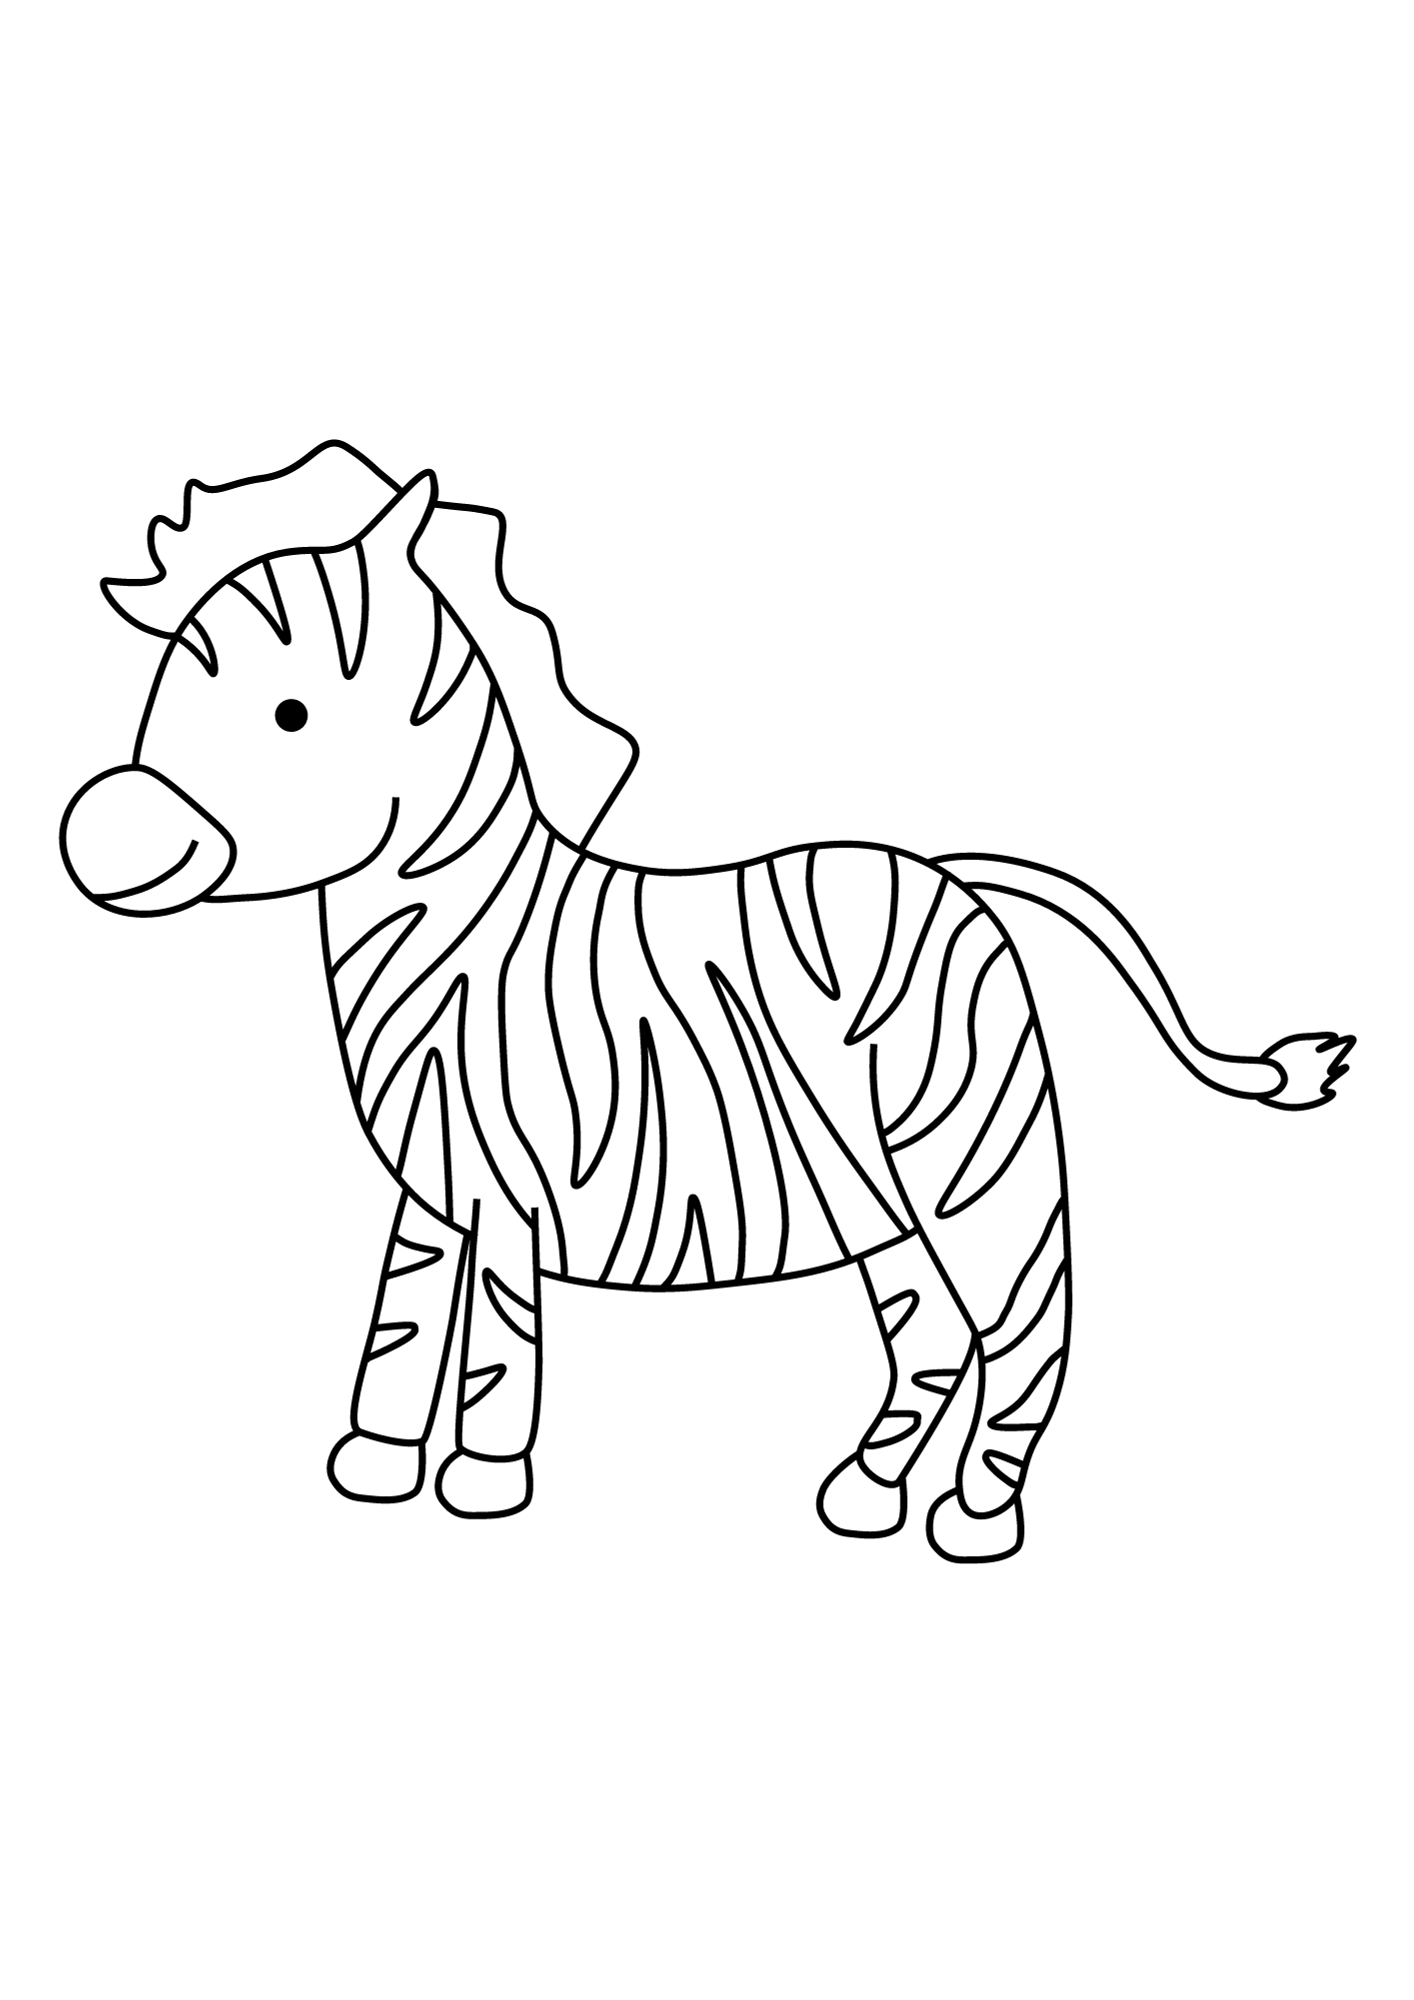 Zebra Kid Coloring Pages